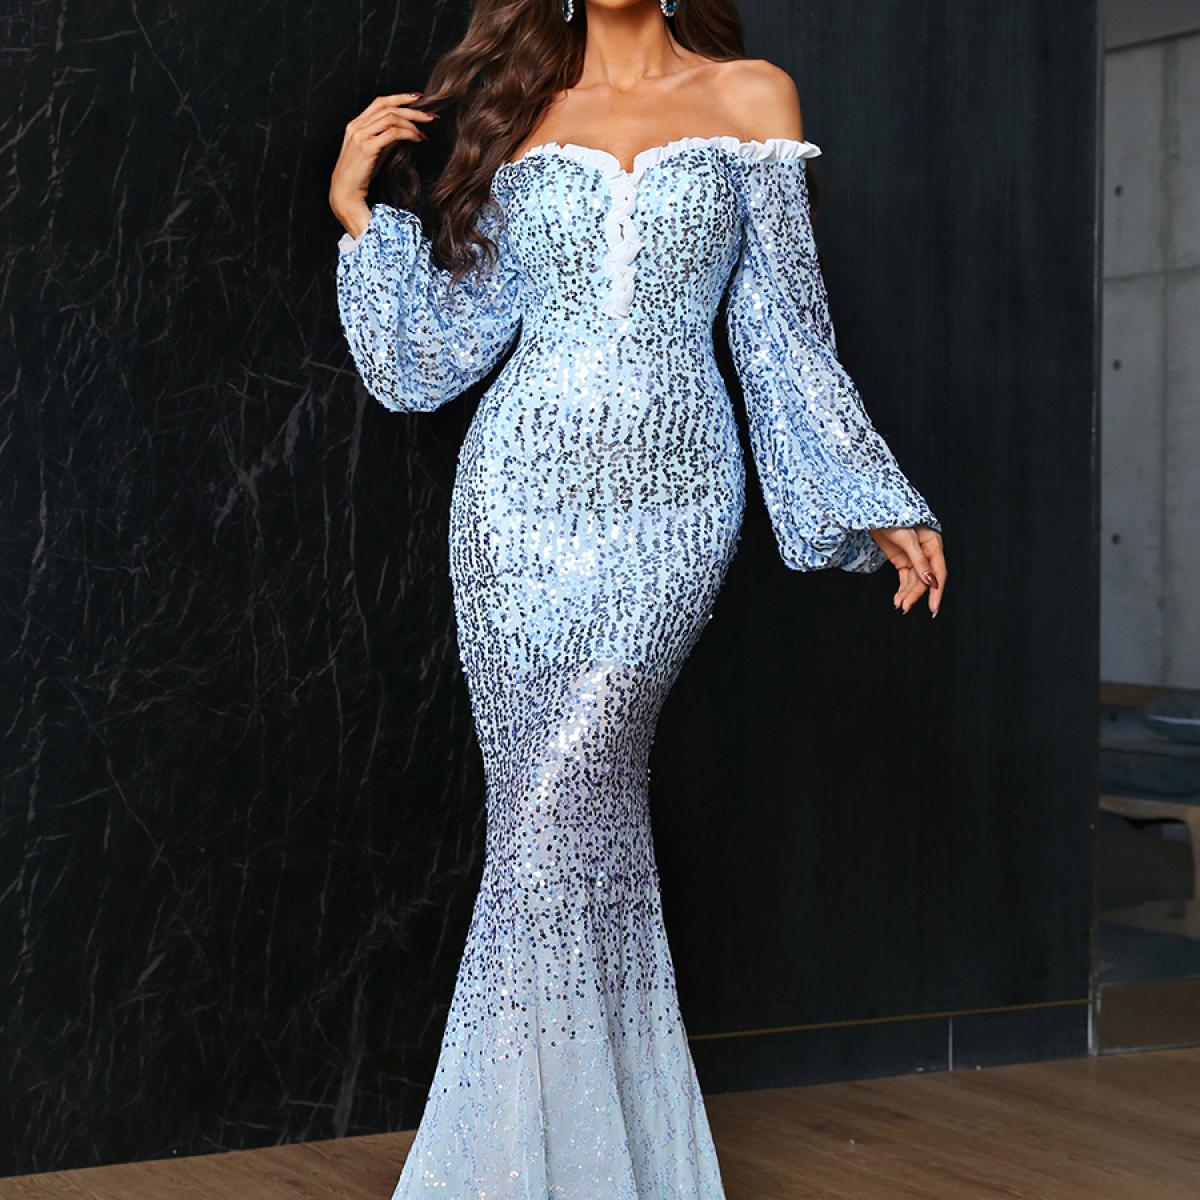 Missord Evening Long Sleev Fashion Dresses Backless Women Sequin Wedding Party Maxi Off Shoulder Prom Bodycon  Blue Dres